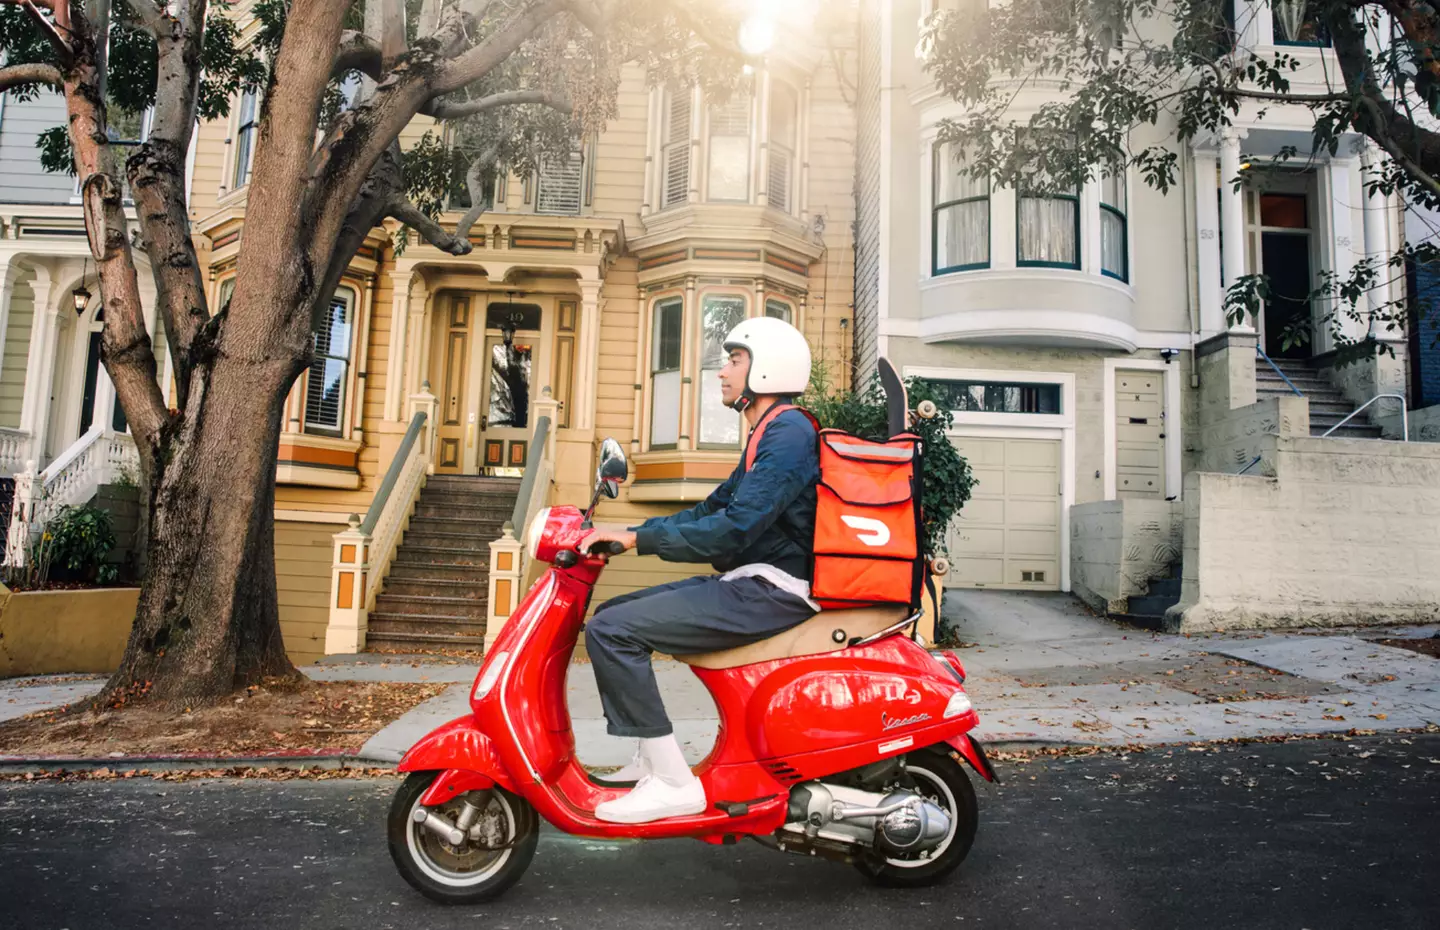 There has been a fair few incidents surrounding DoorDash drivers and tips in recent months.